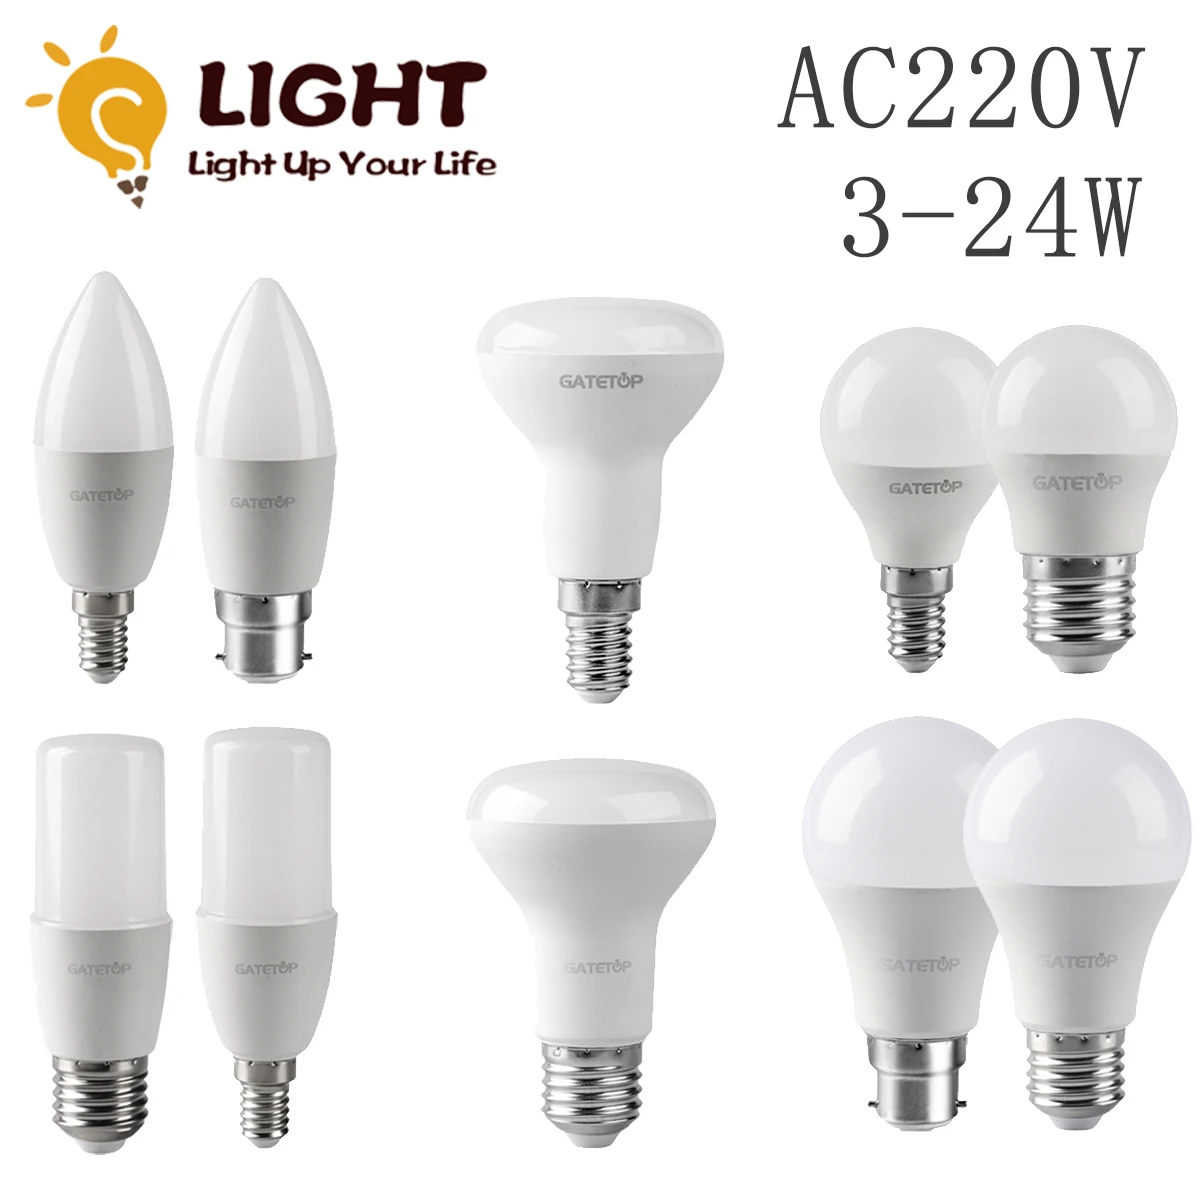 

LED Energy Saving Bulb AC220V E14 E27 B22 3w-24w 3000K 4000K 6000K Lamp With Ce Rohs For Home Office Interior Decoration